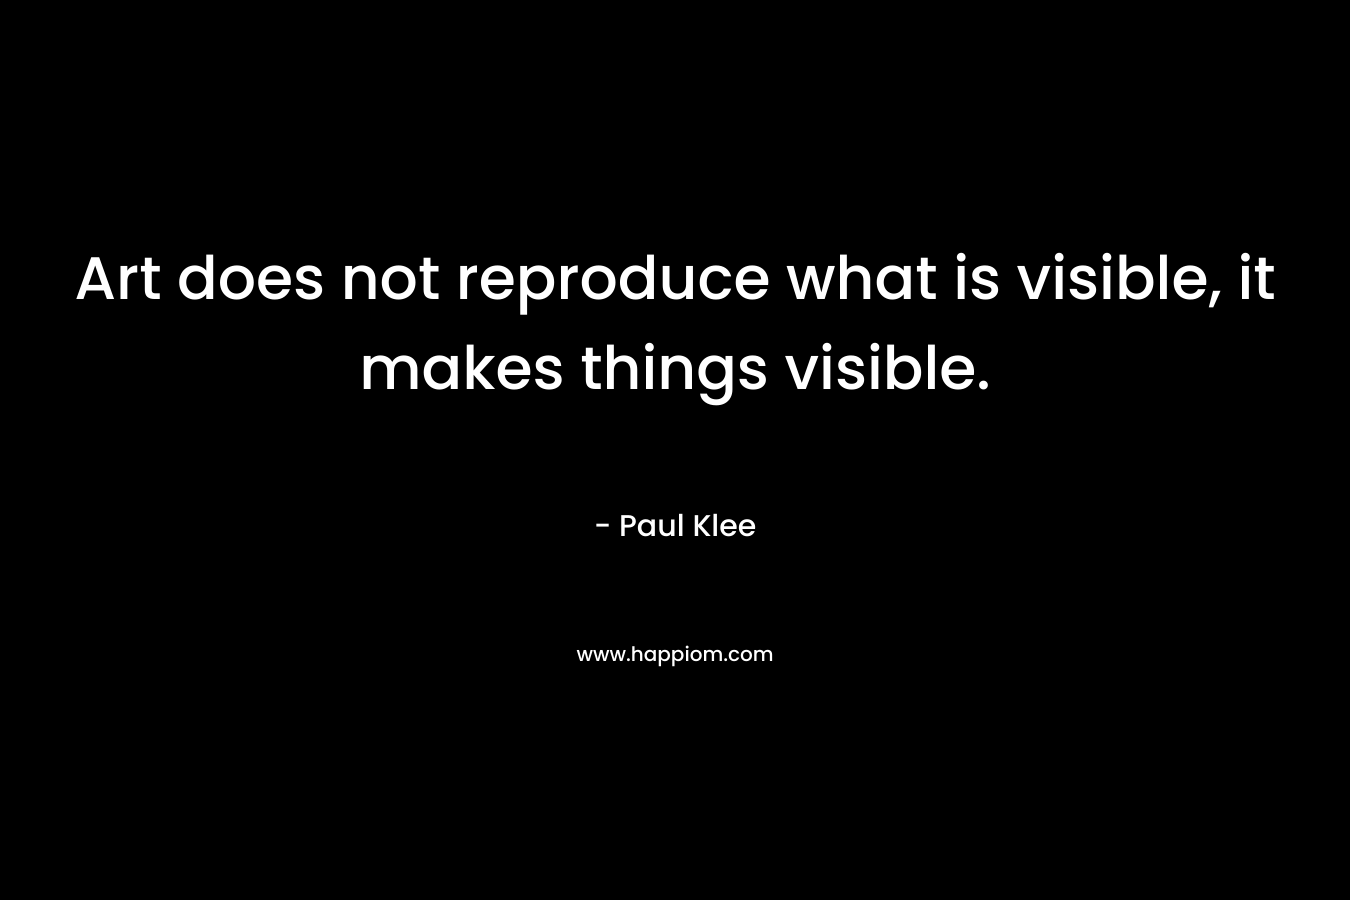 Art does not reproduce what is visible, it makes things visible. – Paul Klee